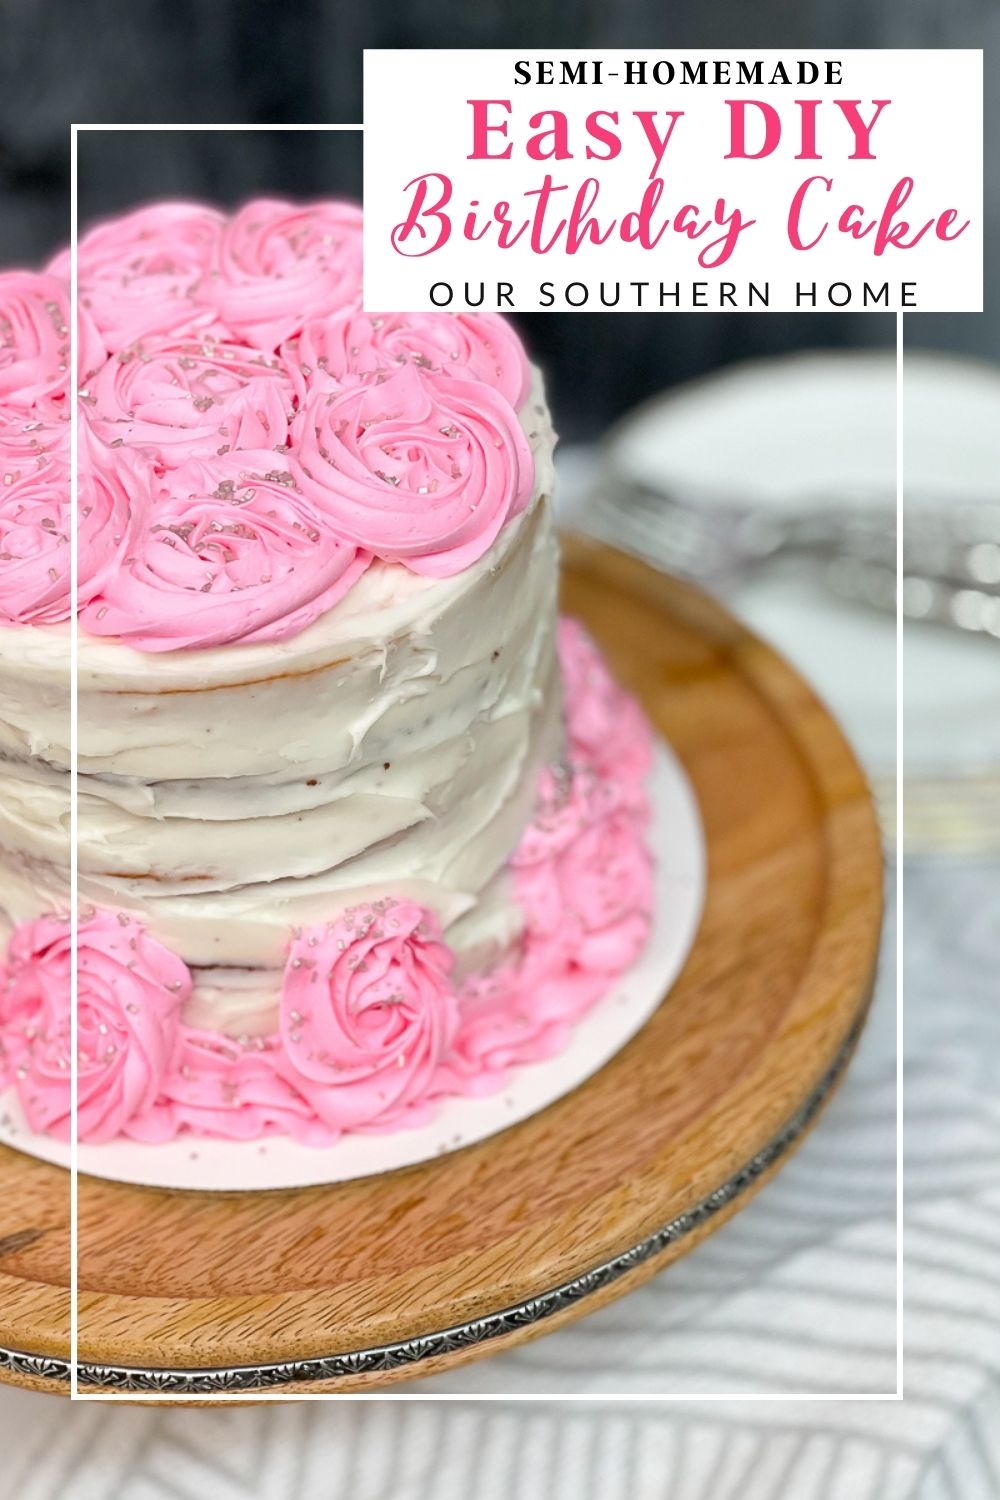 Easy DIY Birthday Cake - Our Southern Home